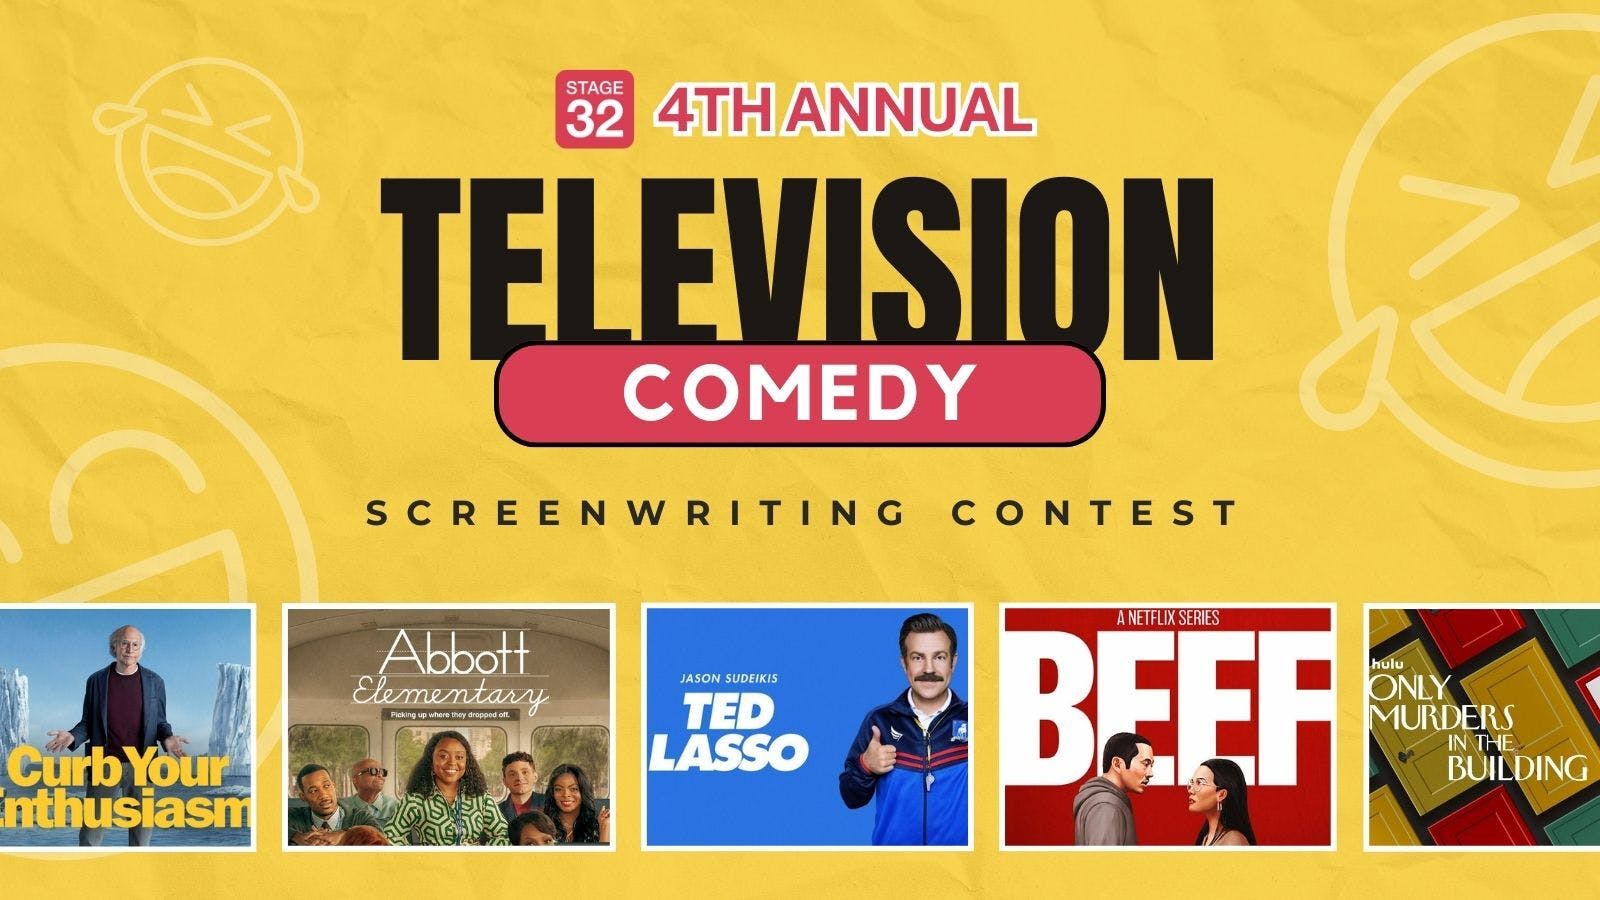 Announcing the 4th Annual TV Comedy Screenwriting Contest